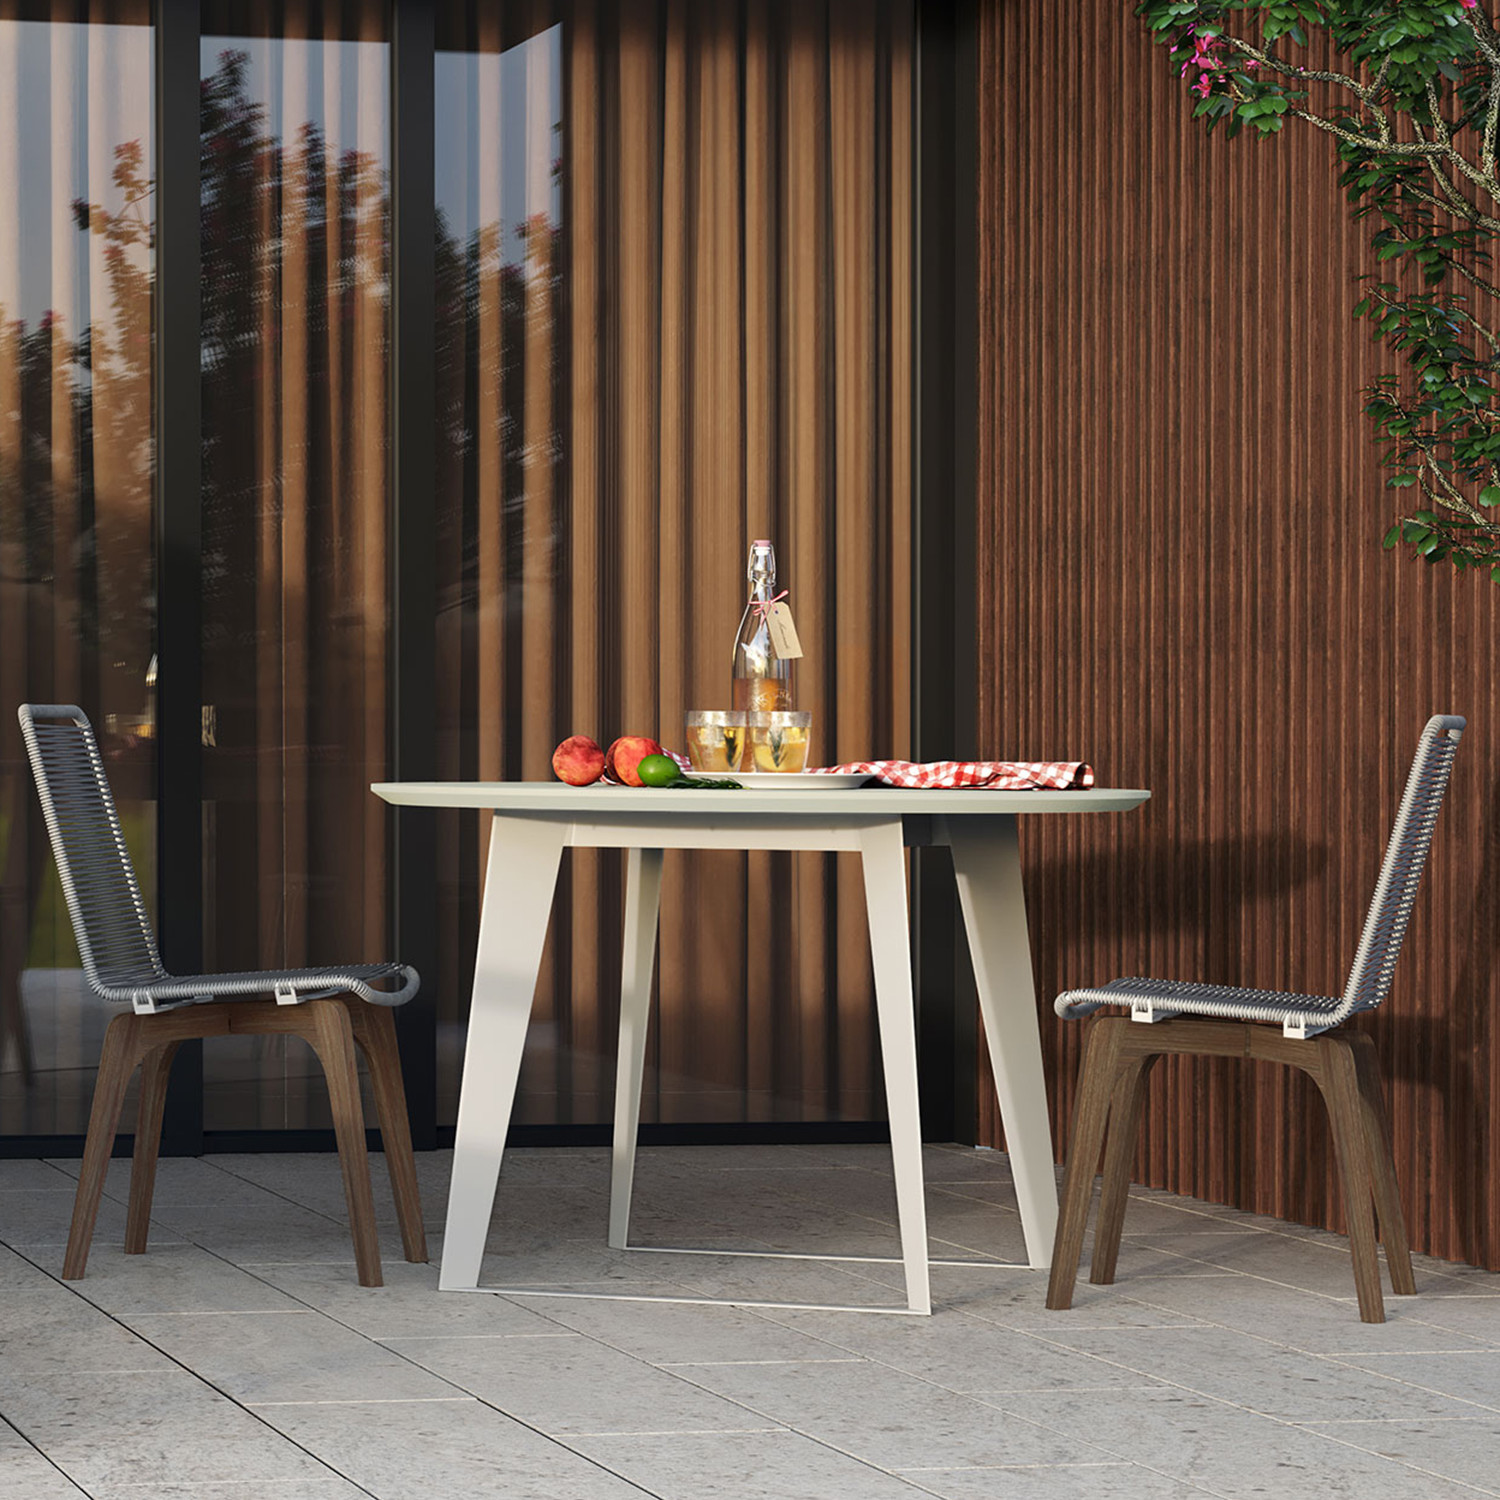 Amsterdam Outdoor Round Dining Table - Modloft Outdoor Furniture ...